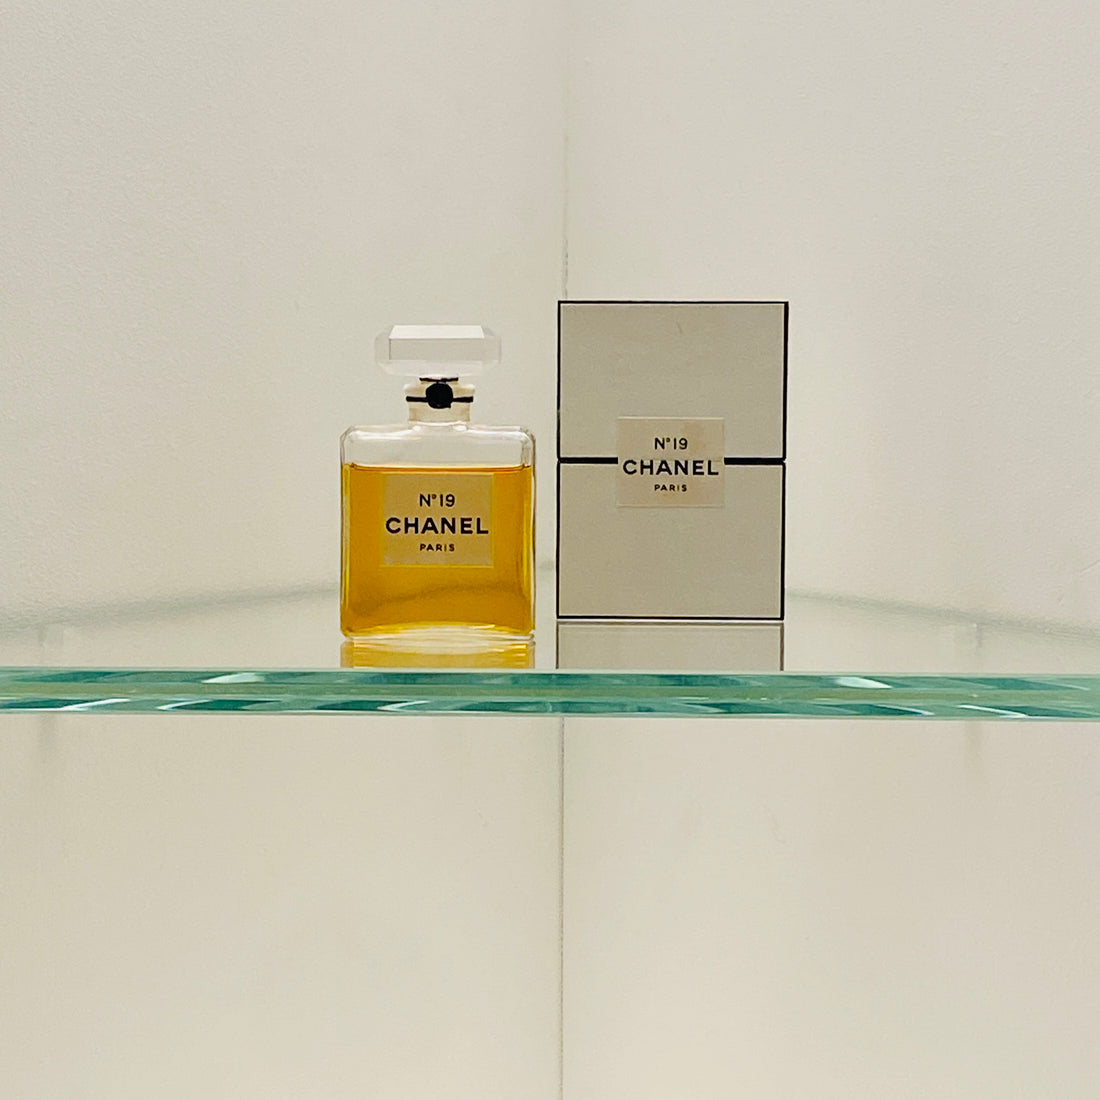 Picture of Chanel 19 perfume on a shelve with the carboard box next to it part of the exhibition at the V&A Museum London